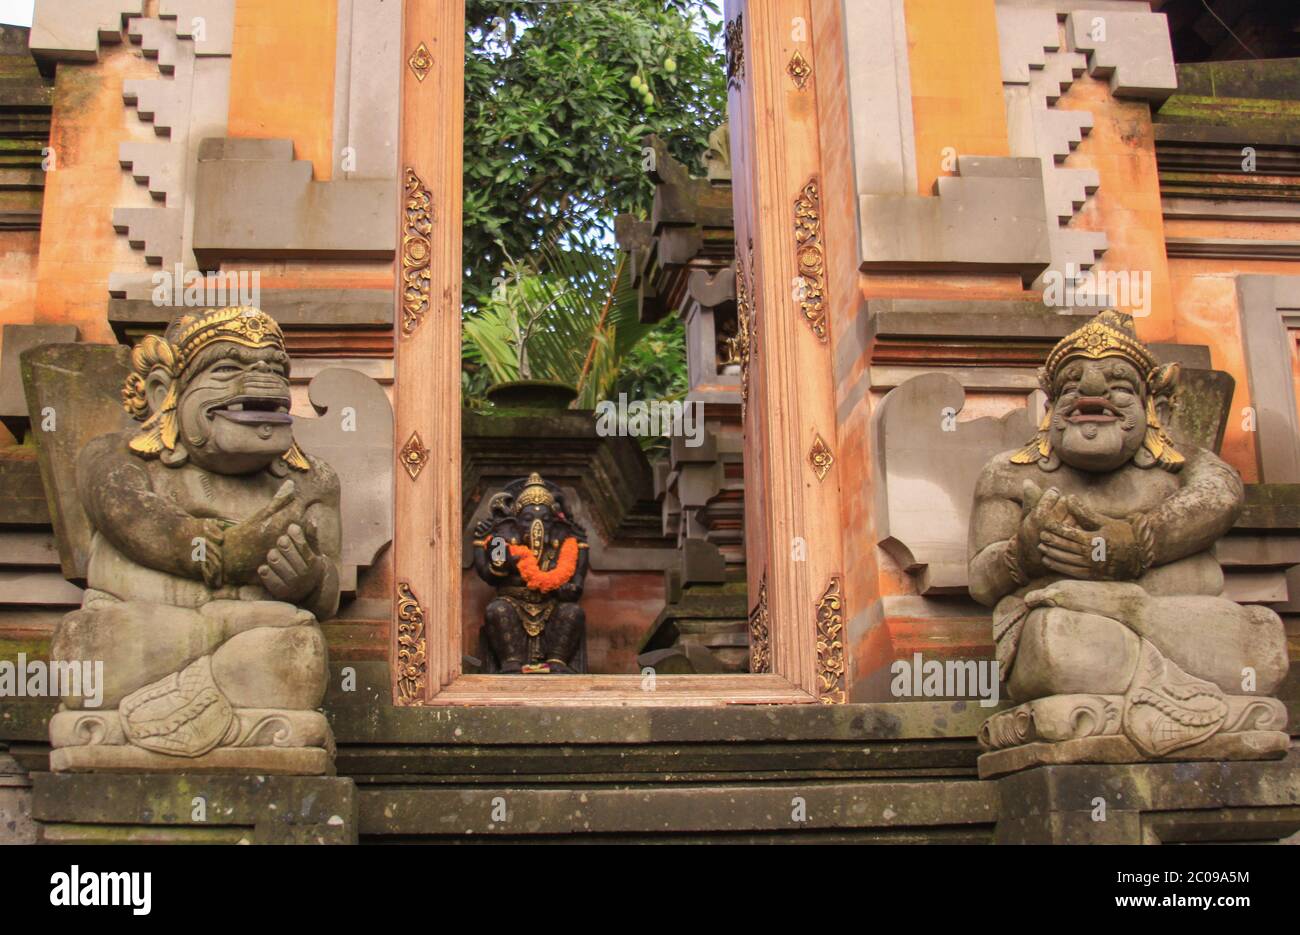 Door or gate to enter into traditional balinese garden architecture detail. Open style pavilion or local pavilion called bale in the garden. Travel ph Stock Photo